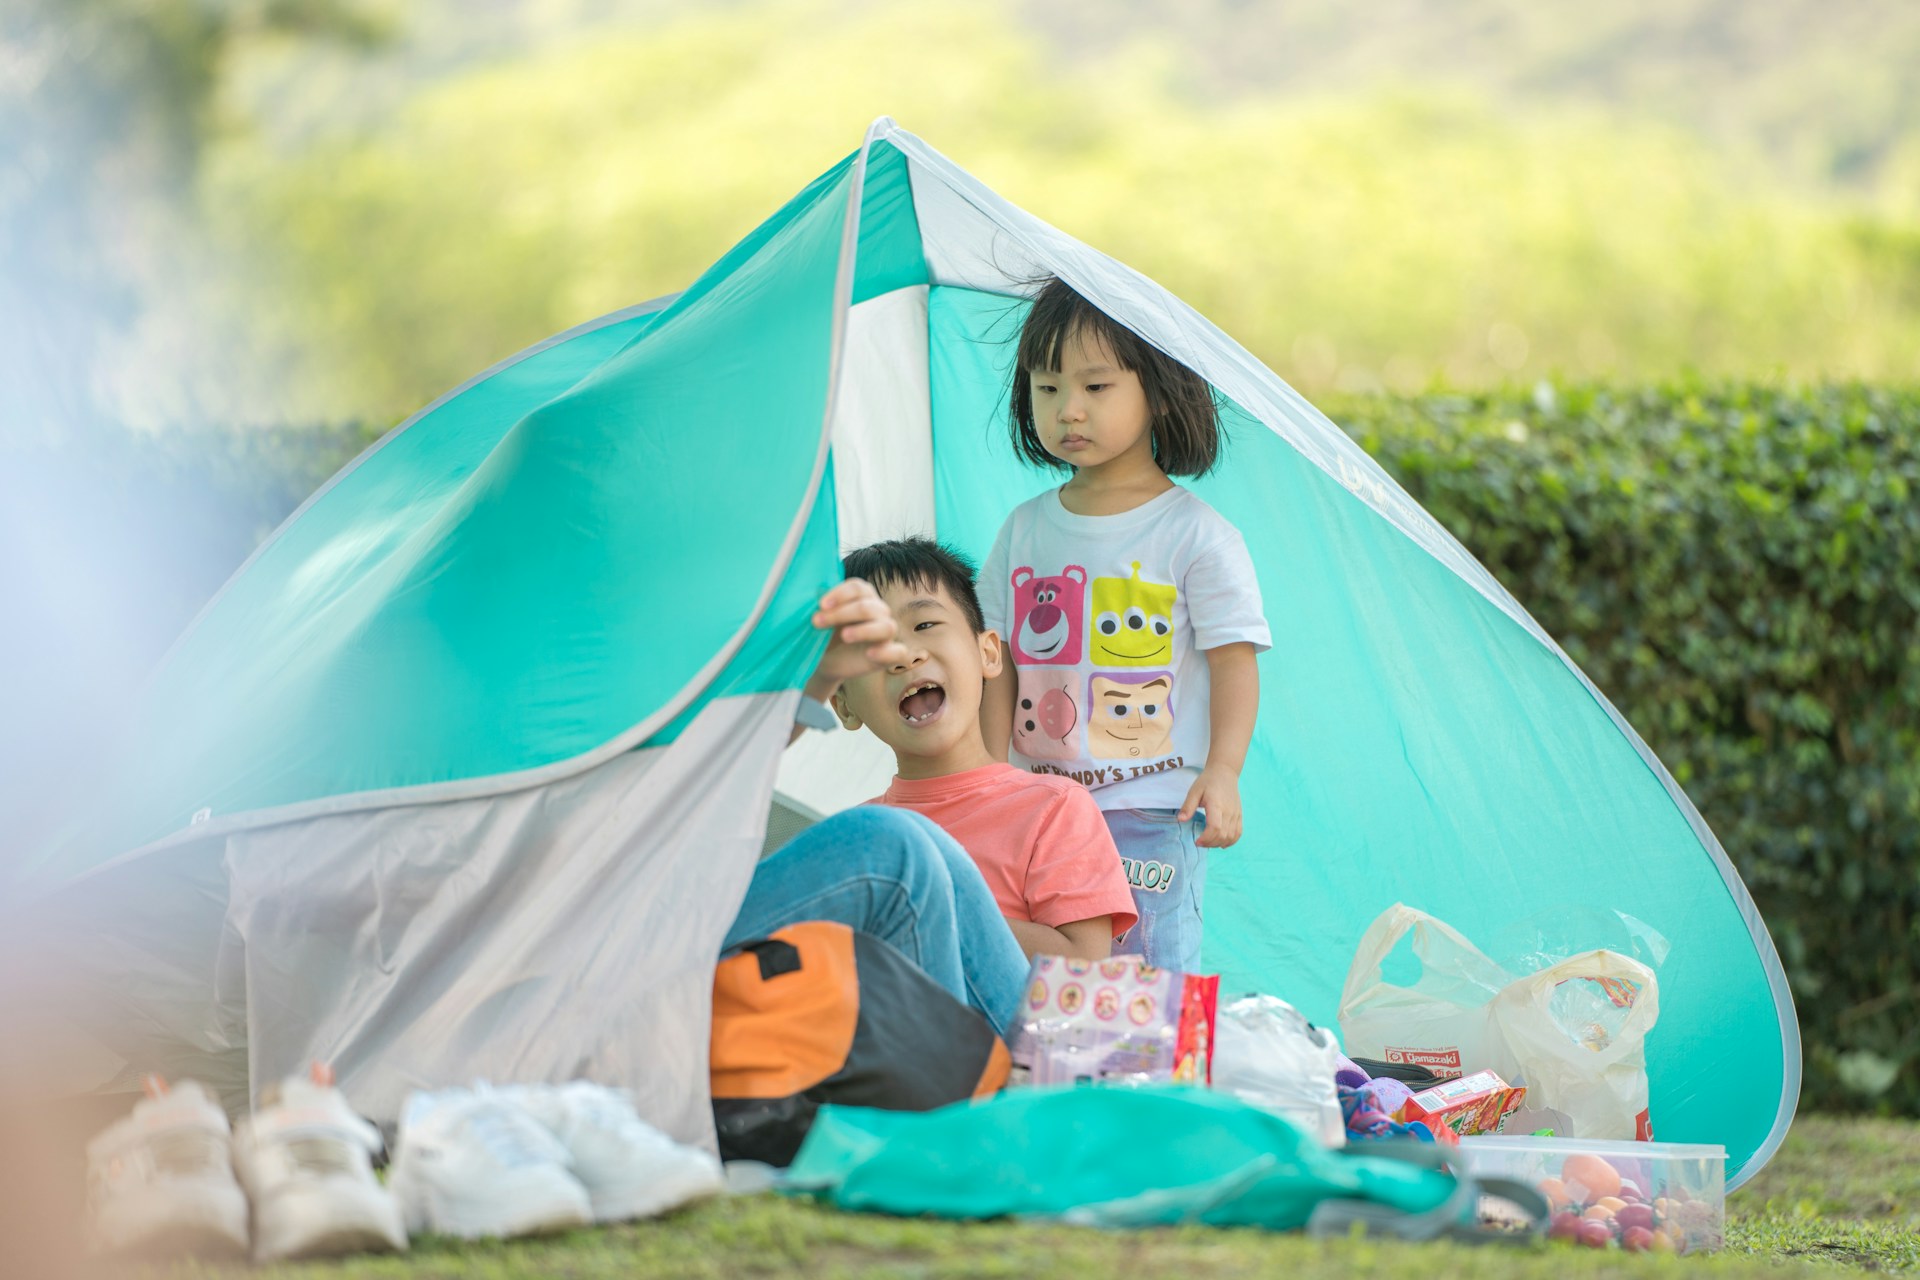 With summer making the weather bearable to be outside at night, give your kids a fun night out by setting up a tent in your backyard. Camping at home! Without the stress of going to an actual campsite, you can set up camp, have some s'mores, share stories, and take in all of the beautiful night sky together.